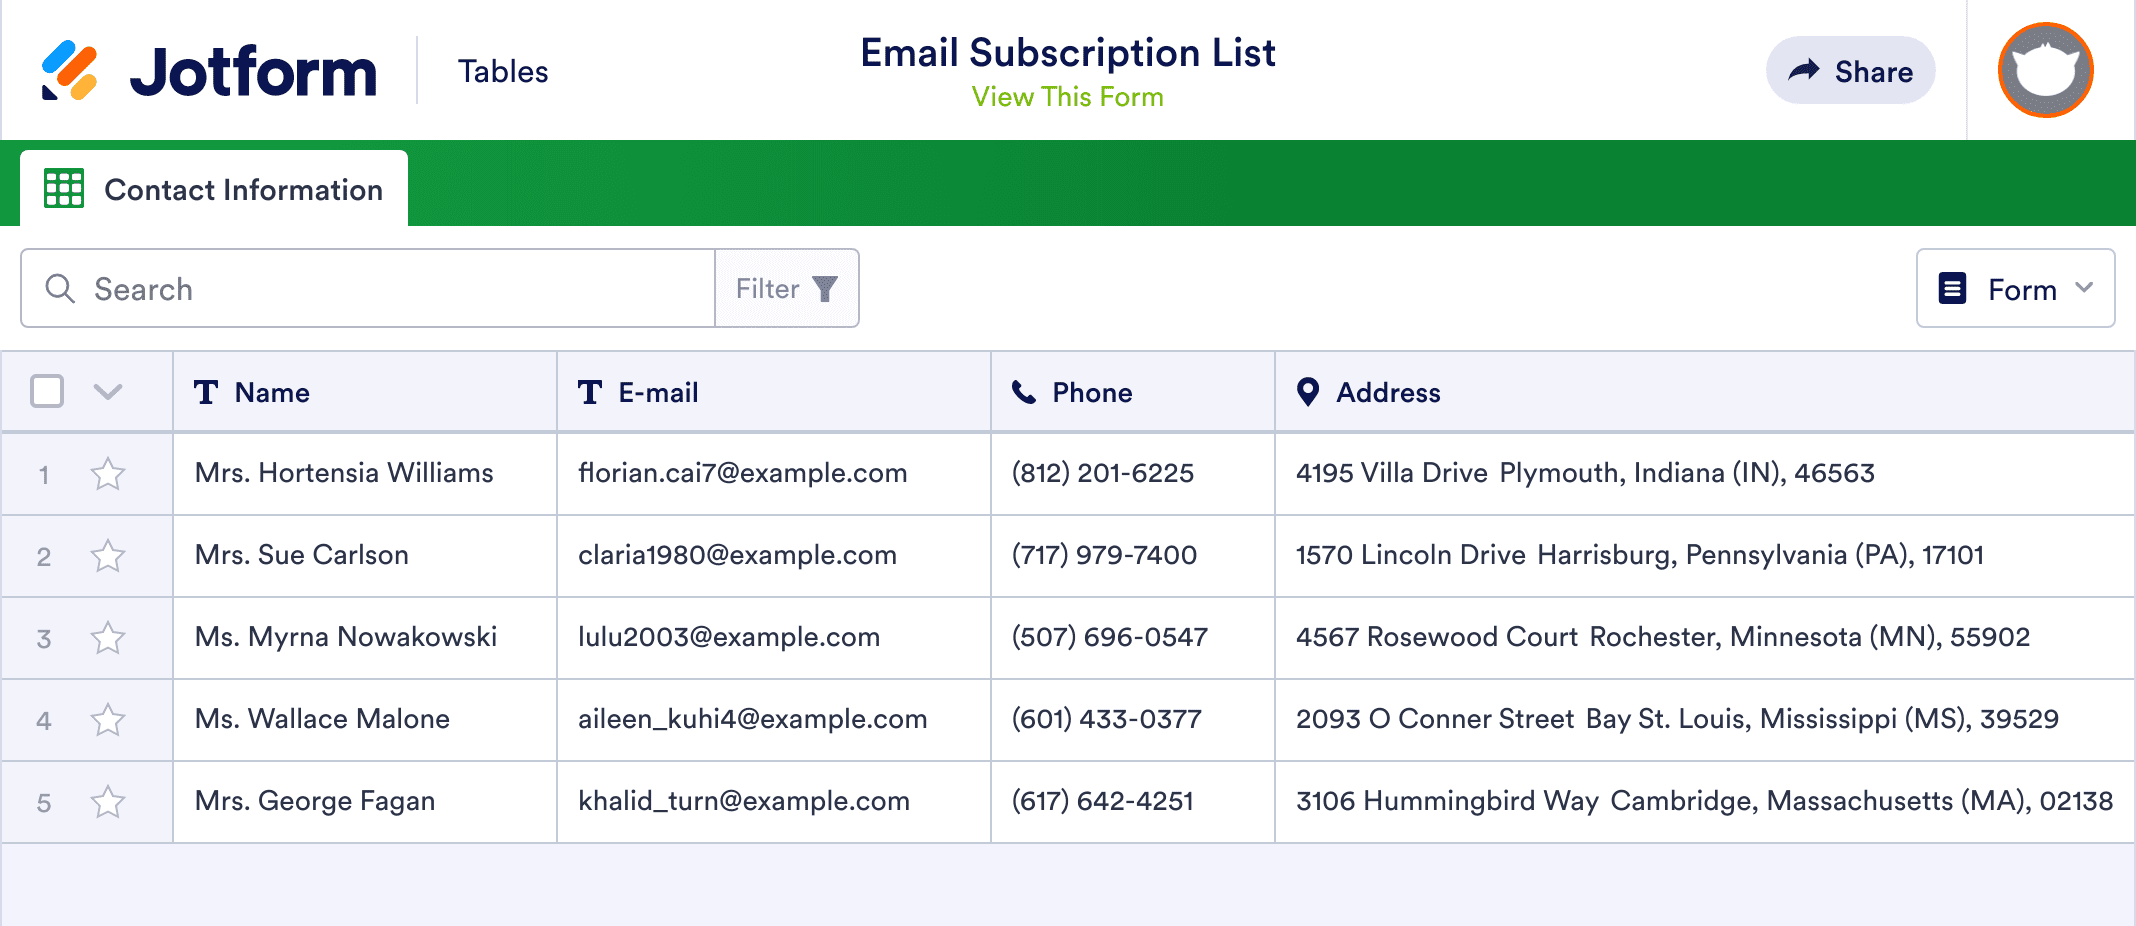 Email Subscription List